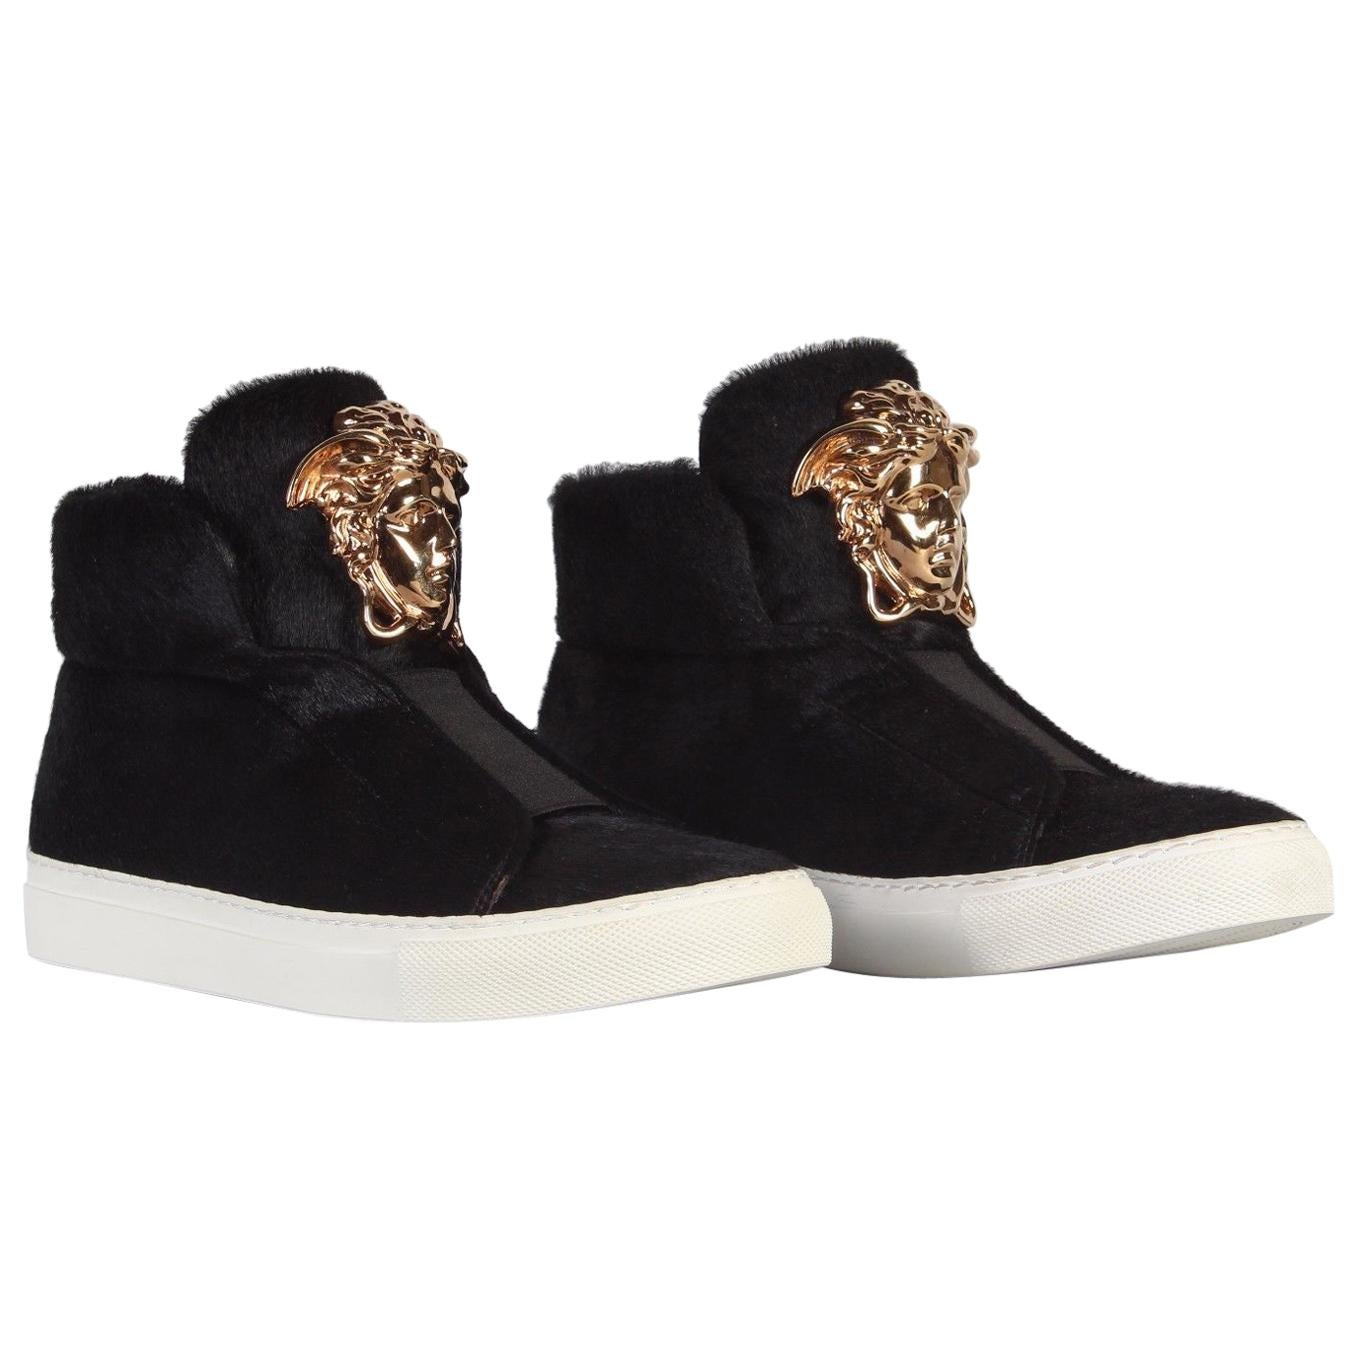 New VERSACE Palazzo Black Calf hair Sneakers with gold Medusa